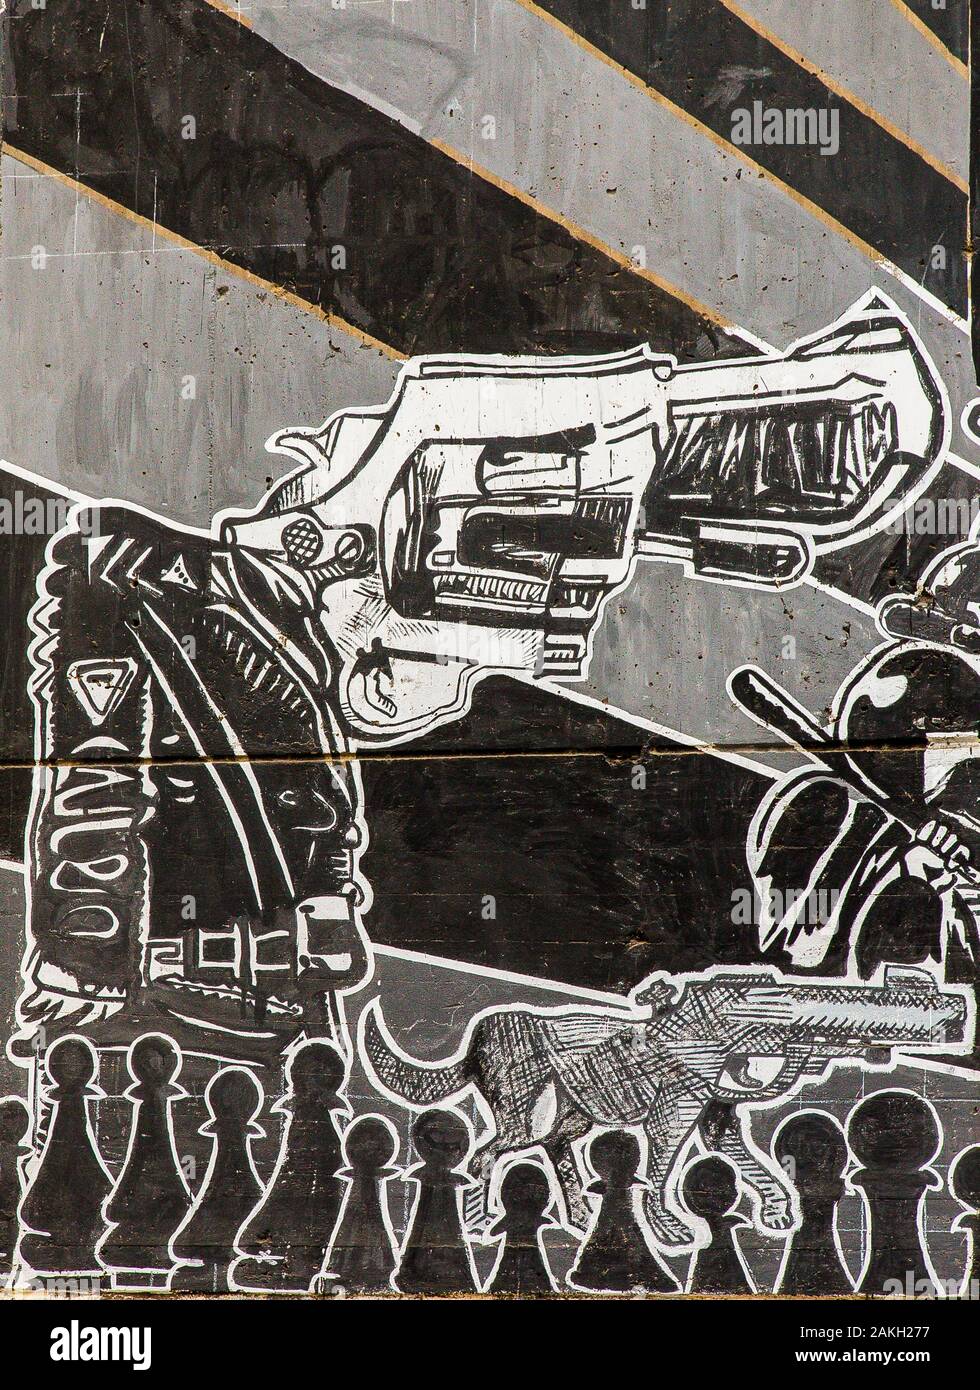 Egypt, Cairo, graffiti of the Egyptian revolution, 'the ruler and freedom' : A soldier and a dog, have their heads replaced by a gun. Stock Photo